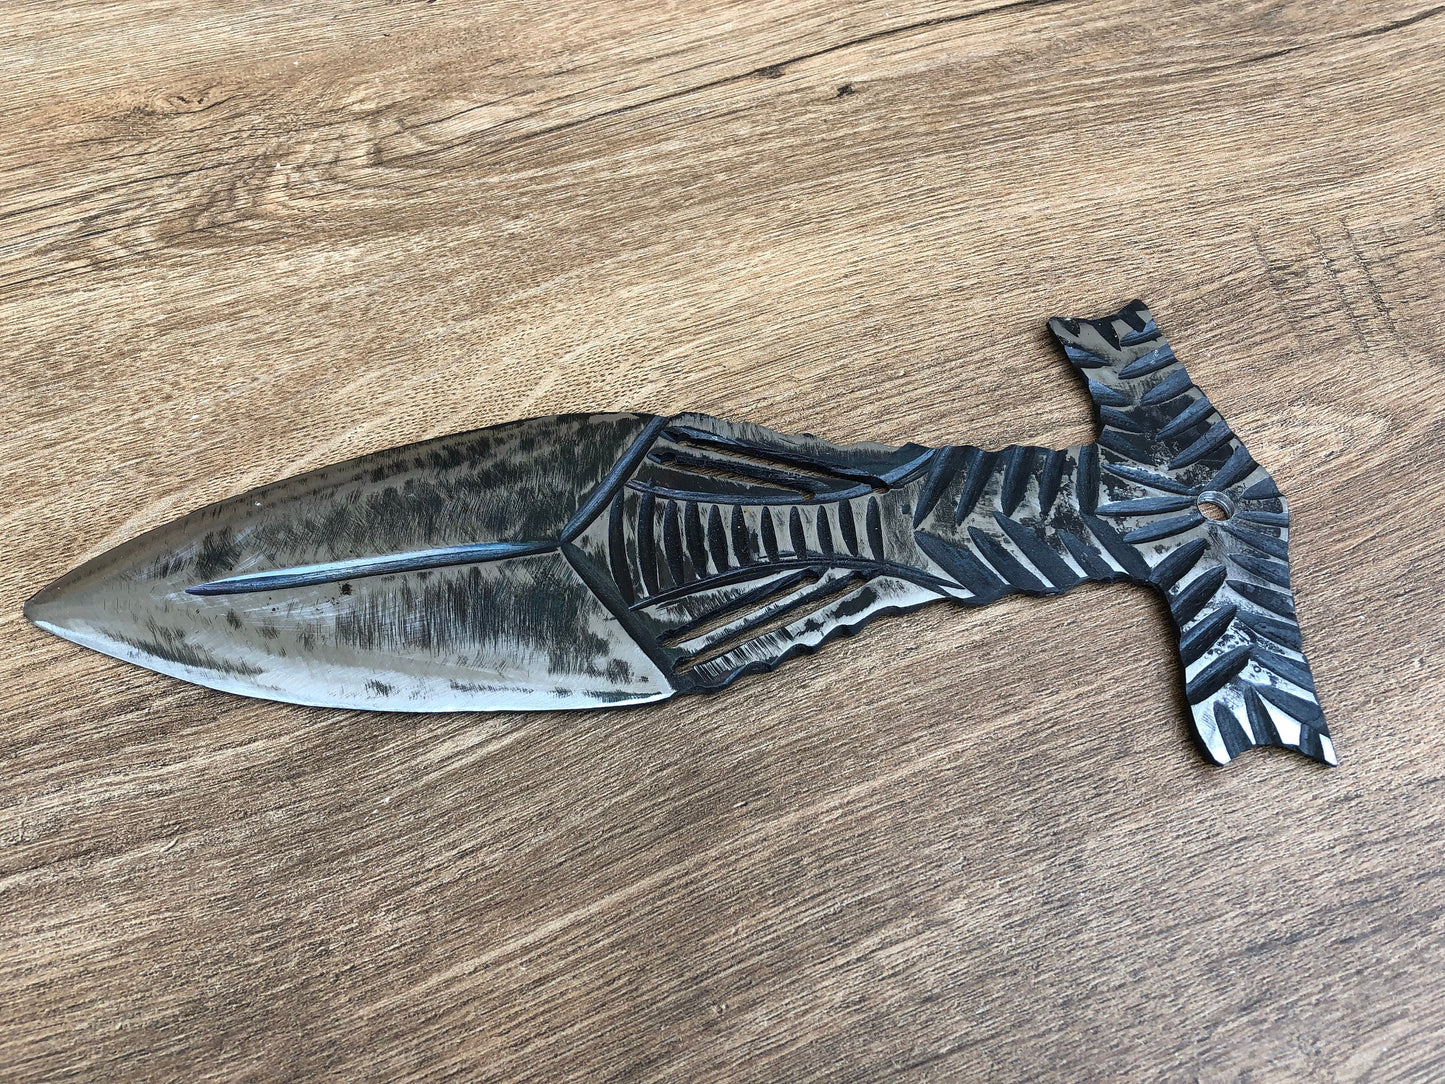 Viking knife, hand forged knife, steel knife, knife gift, knives, tools, instruments,iron gifts,iron gift for him, best man gift, viking axe